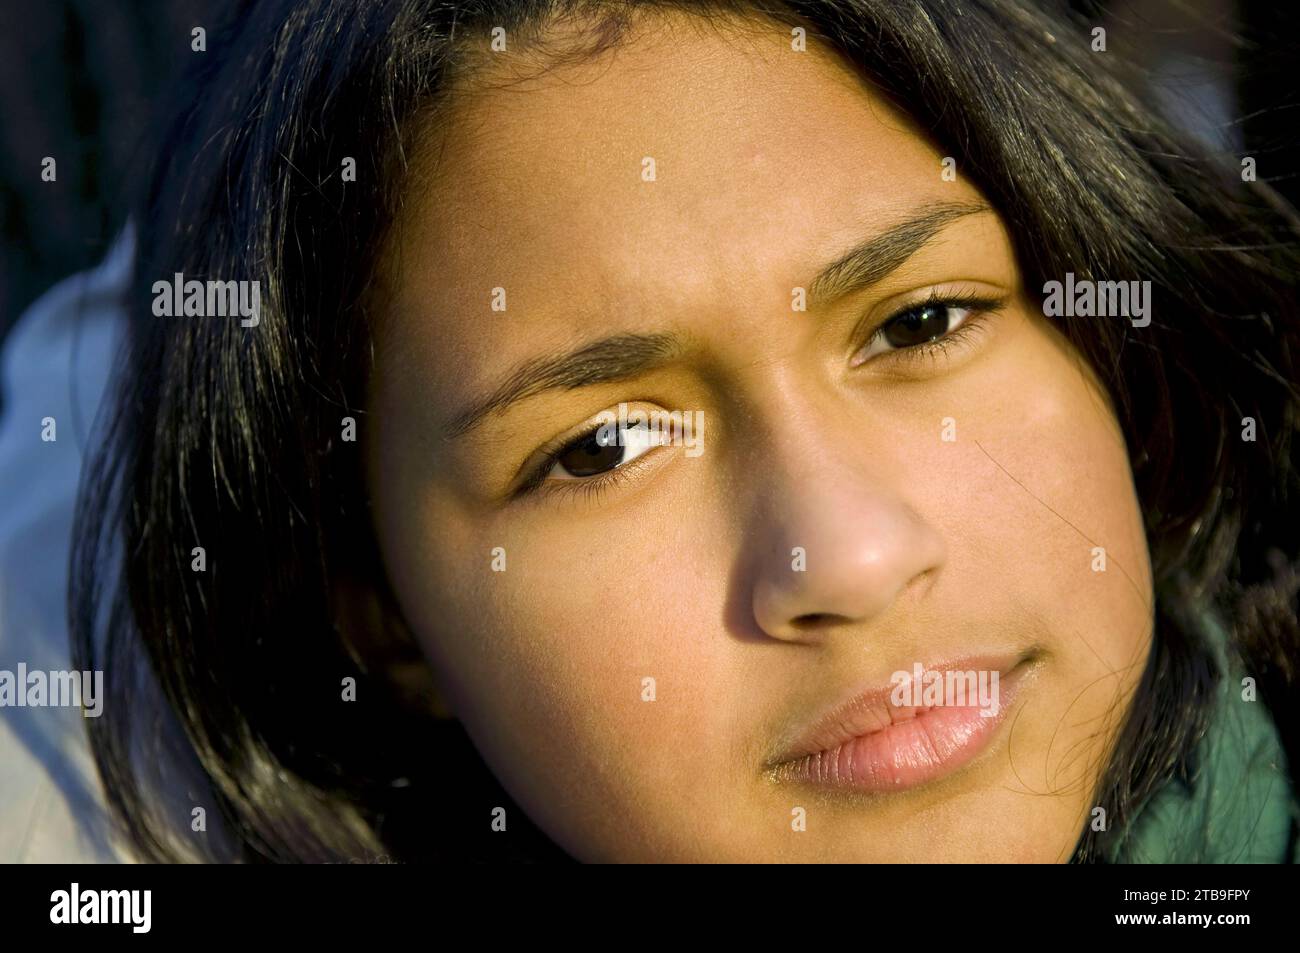 Close-up of a girl's face illuminated in warm sunlight; Staten Island, New York, United States of America Stock Photo